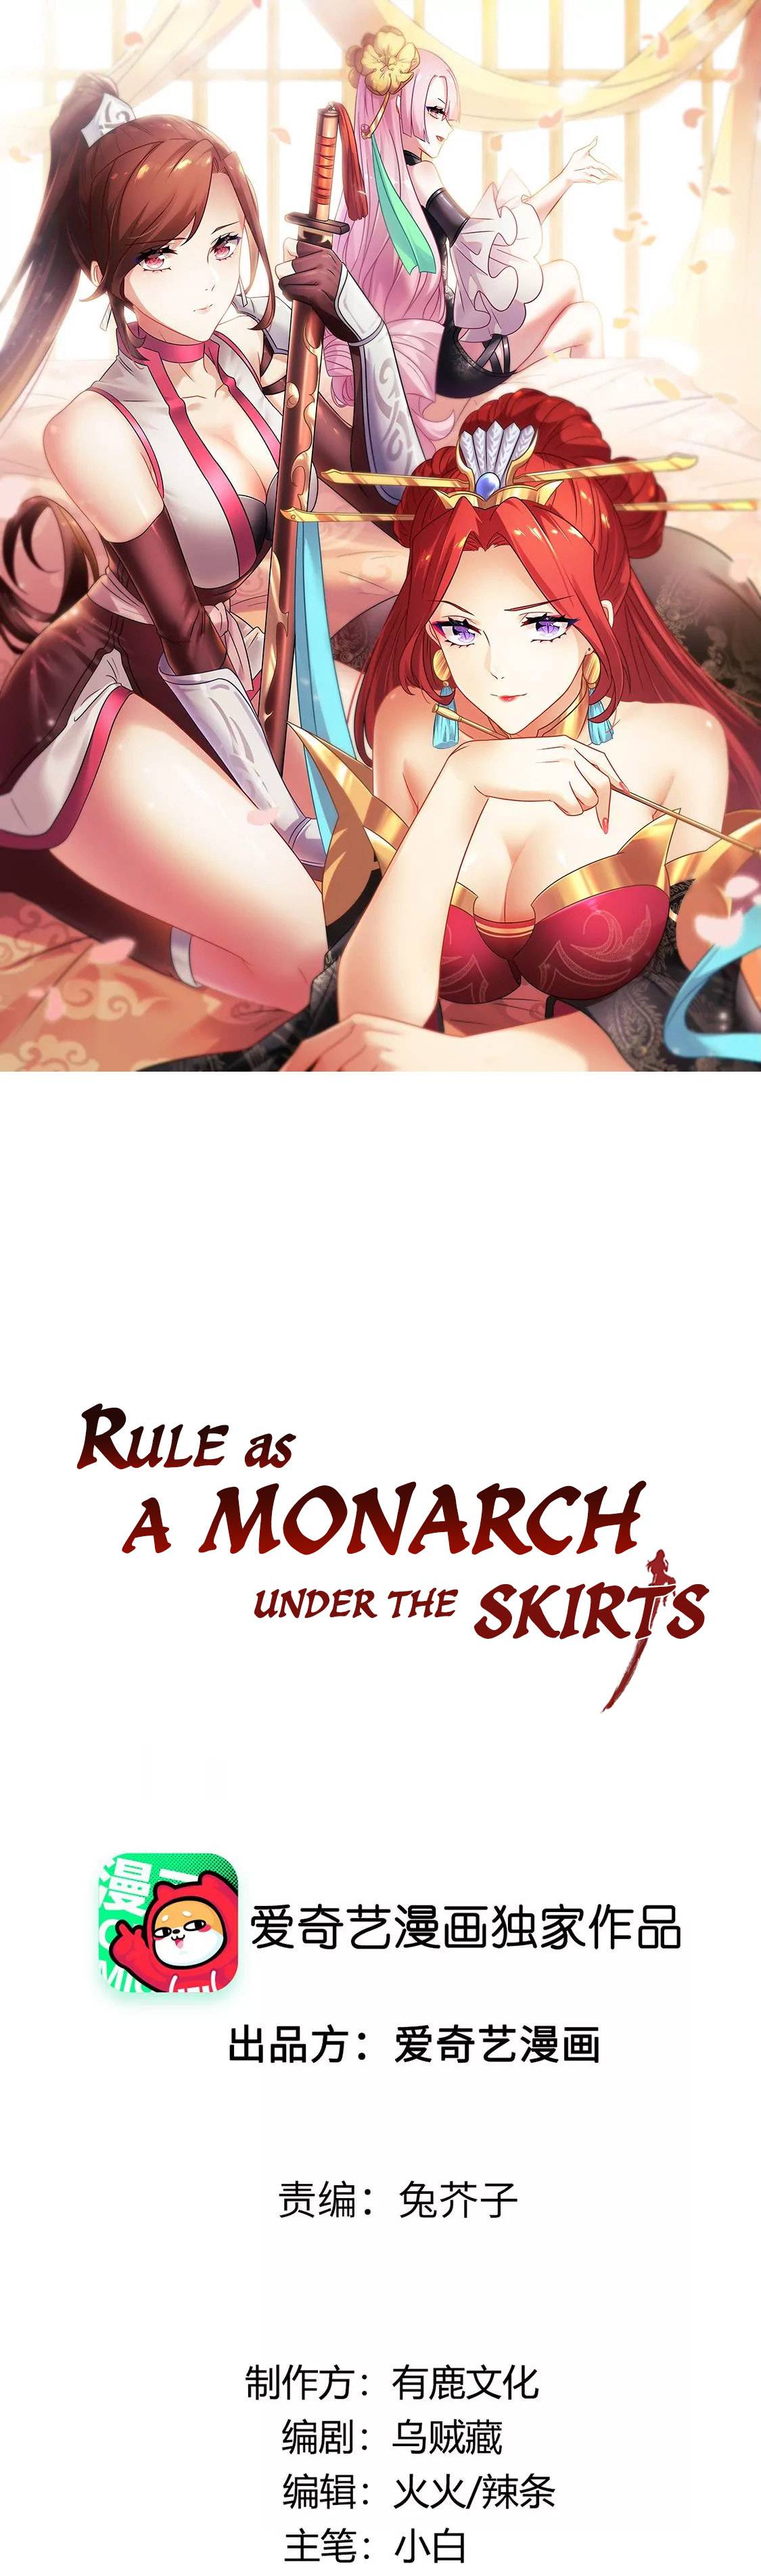 Rule As A Monarch Under The Skirts - Page 2